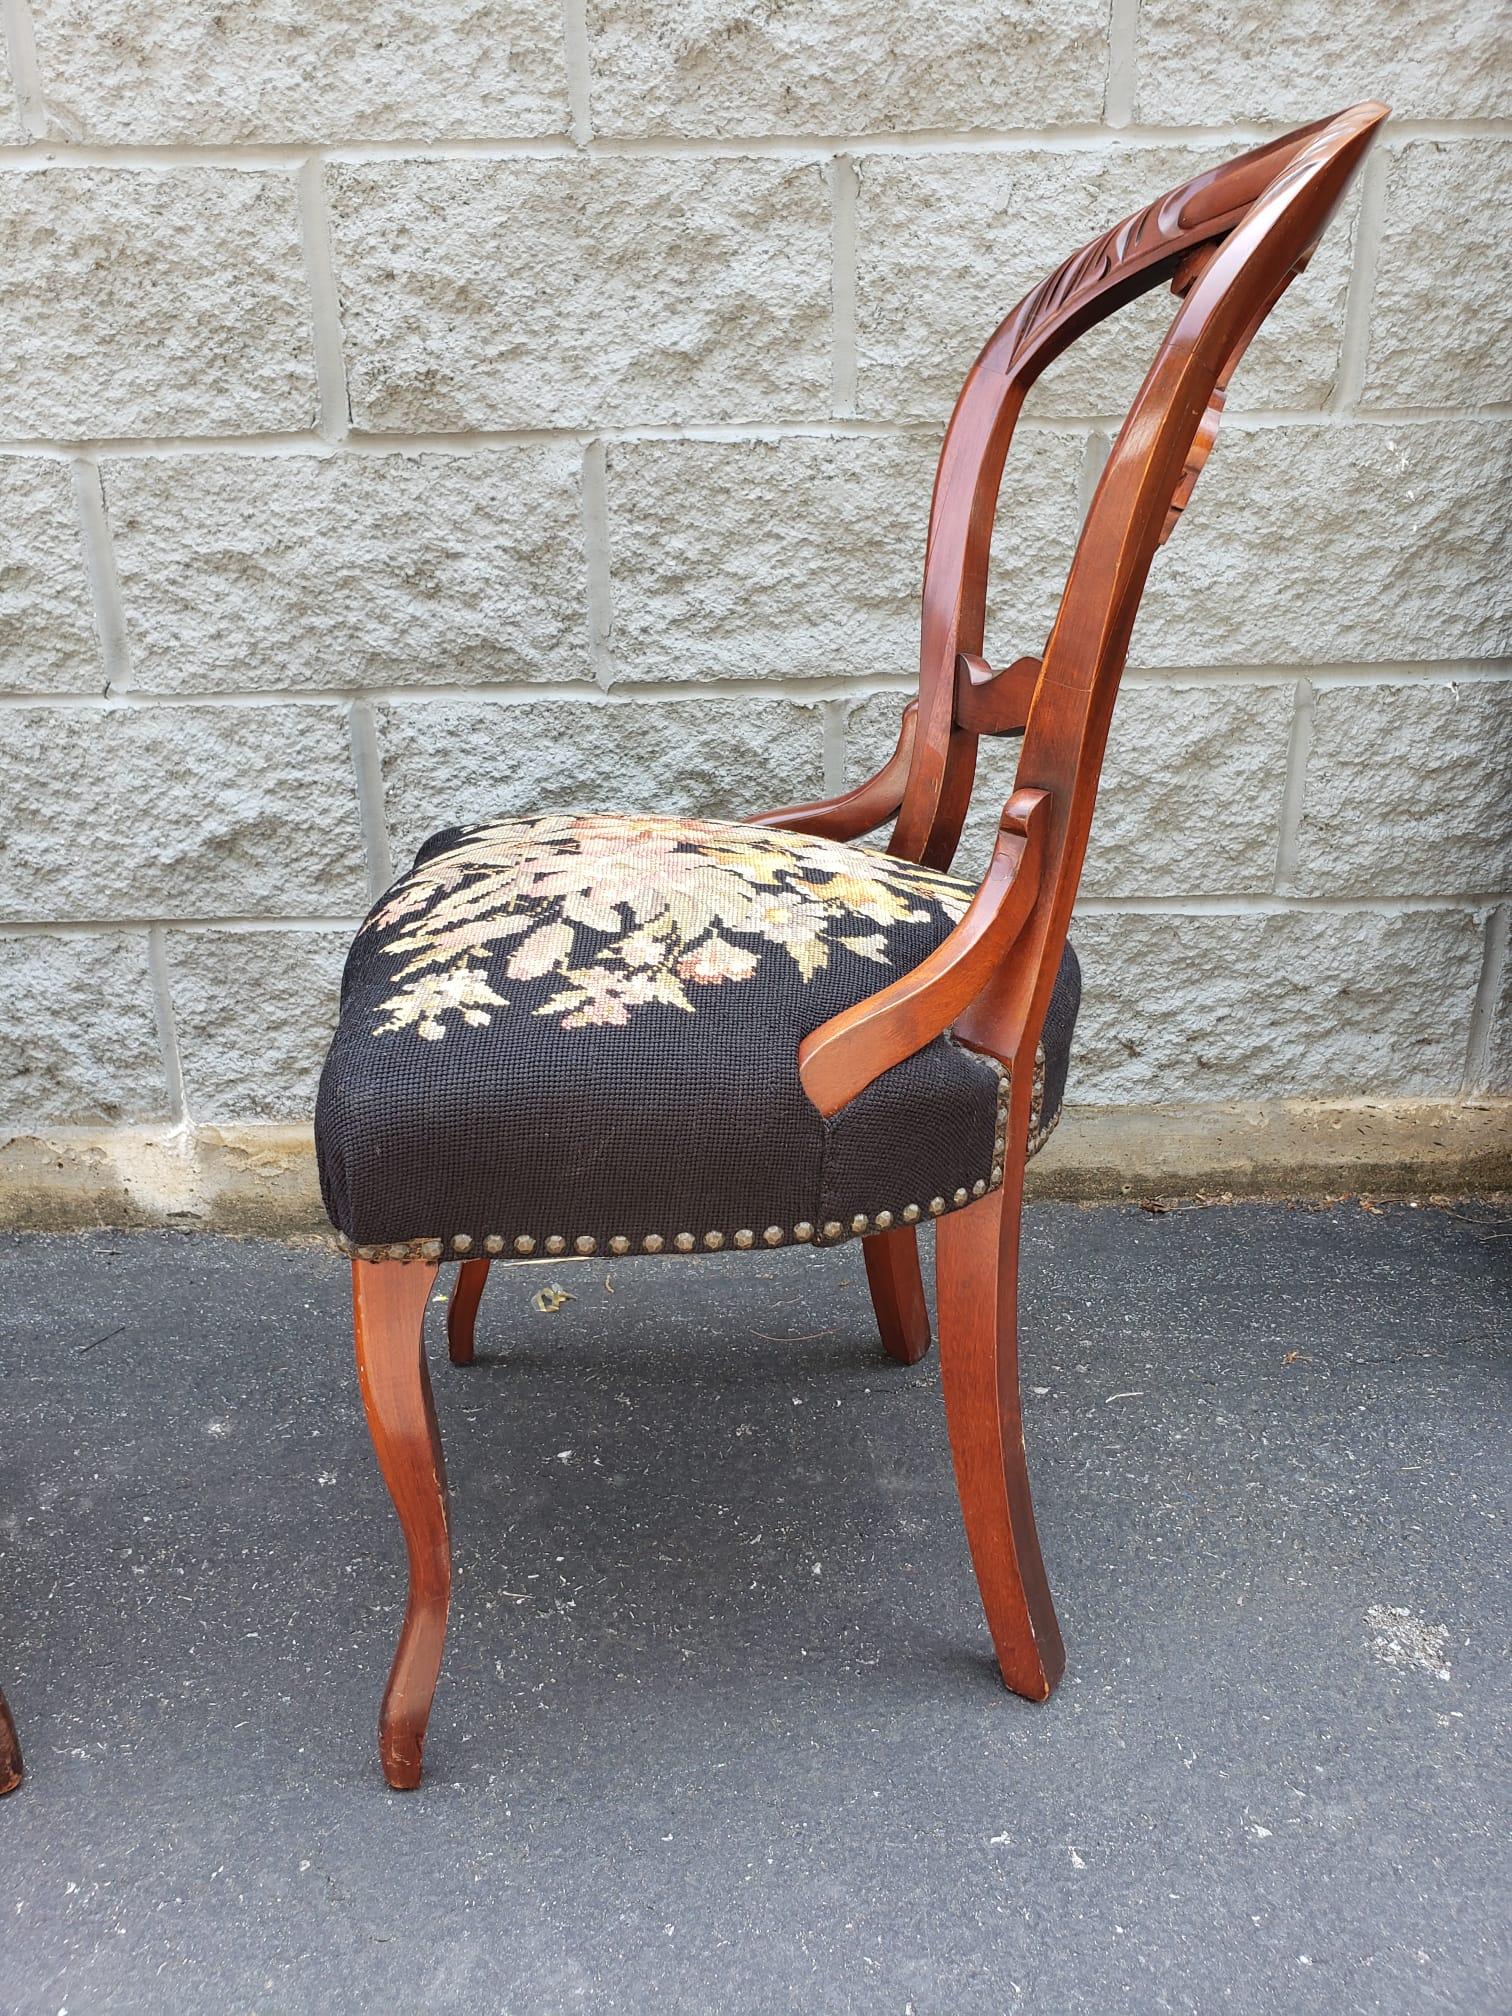 Needlework Victorian Mahogany & Floral NeedlePoint Upholstered Chairs with NailHead Trims For Sale